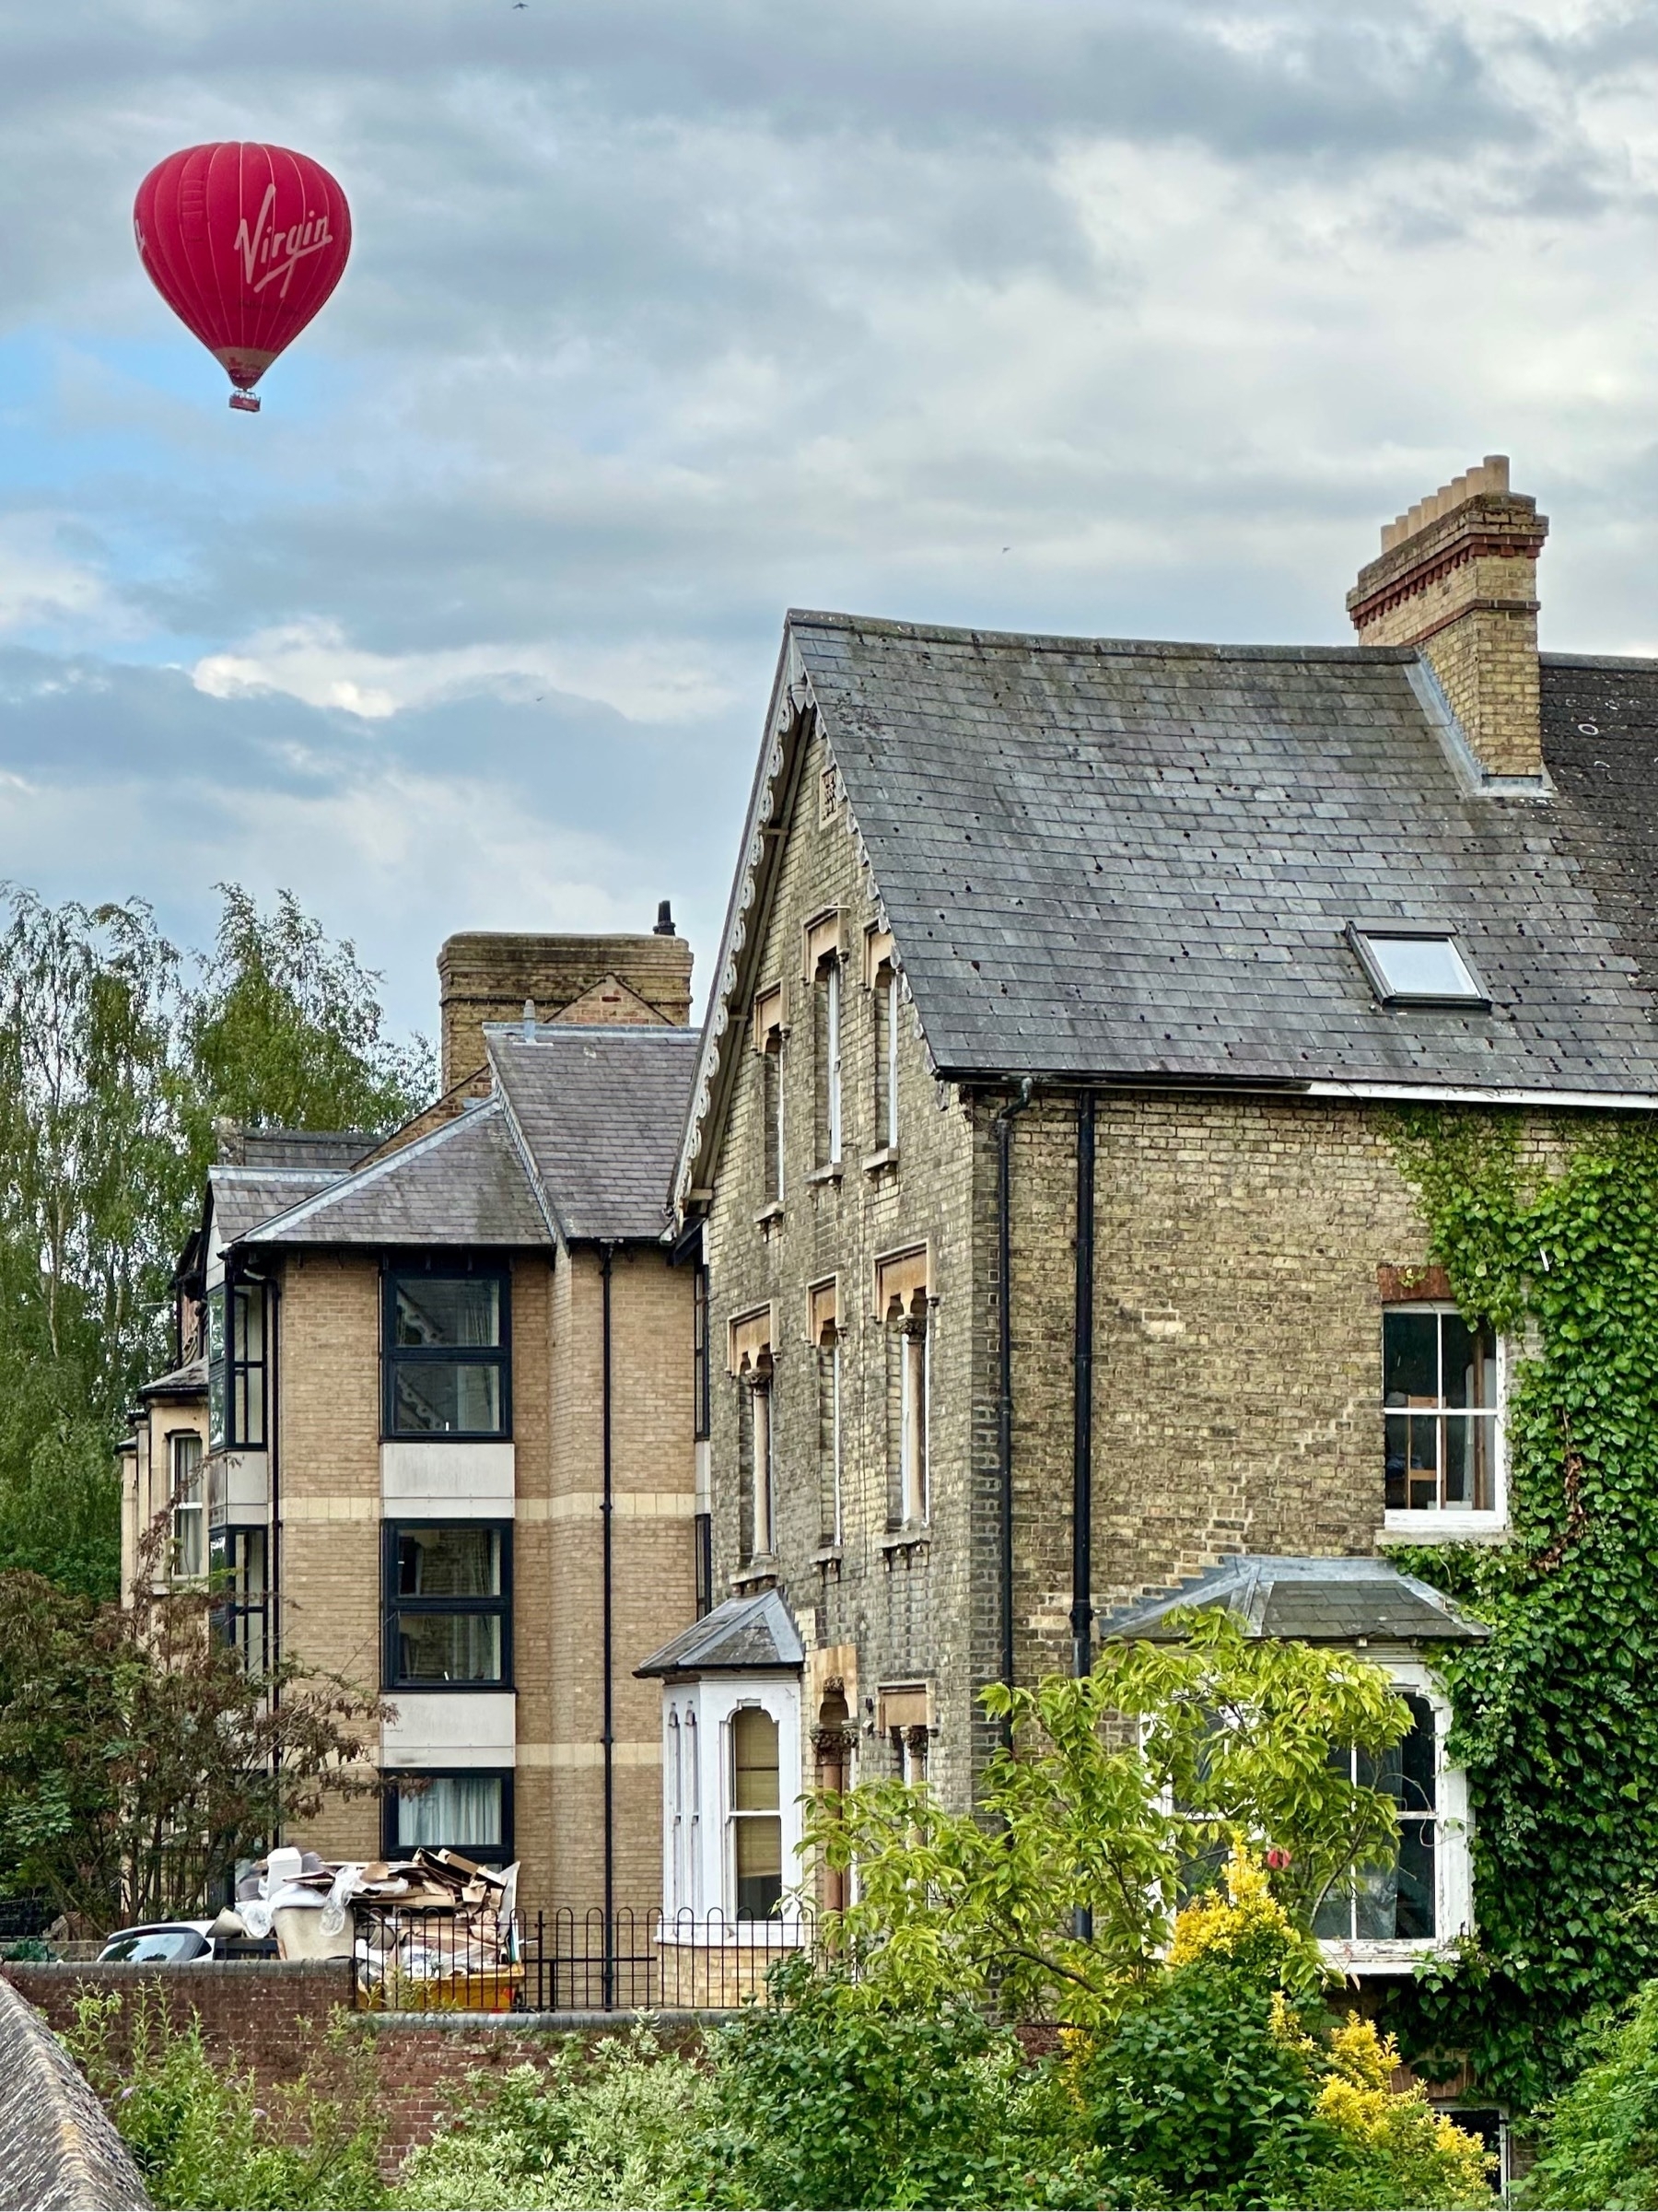 Hot air balloon floating over city houses